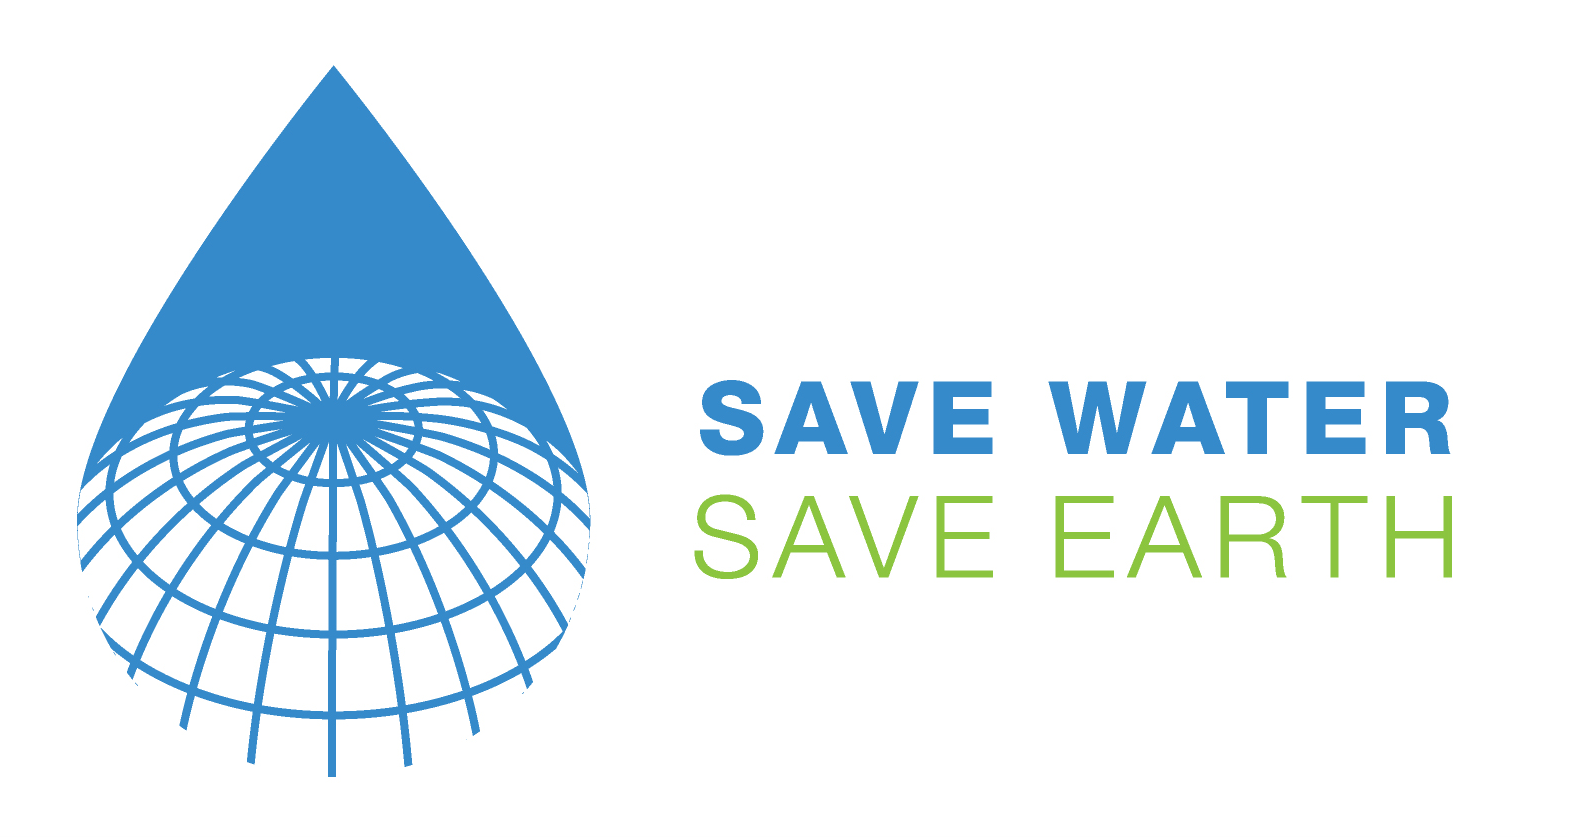 Save water, filtered water